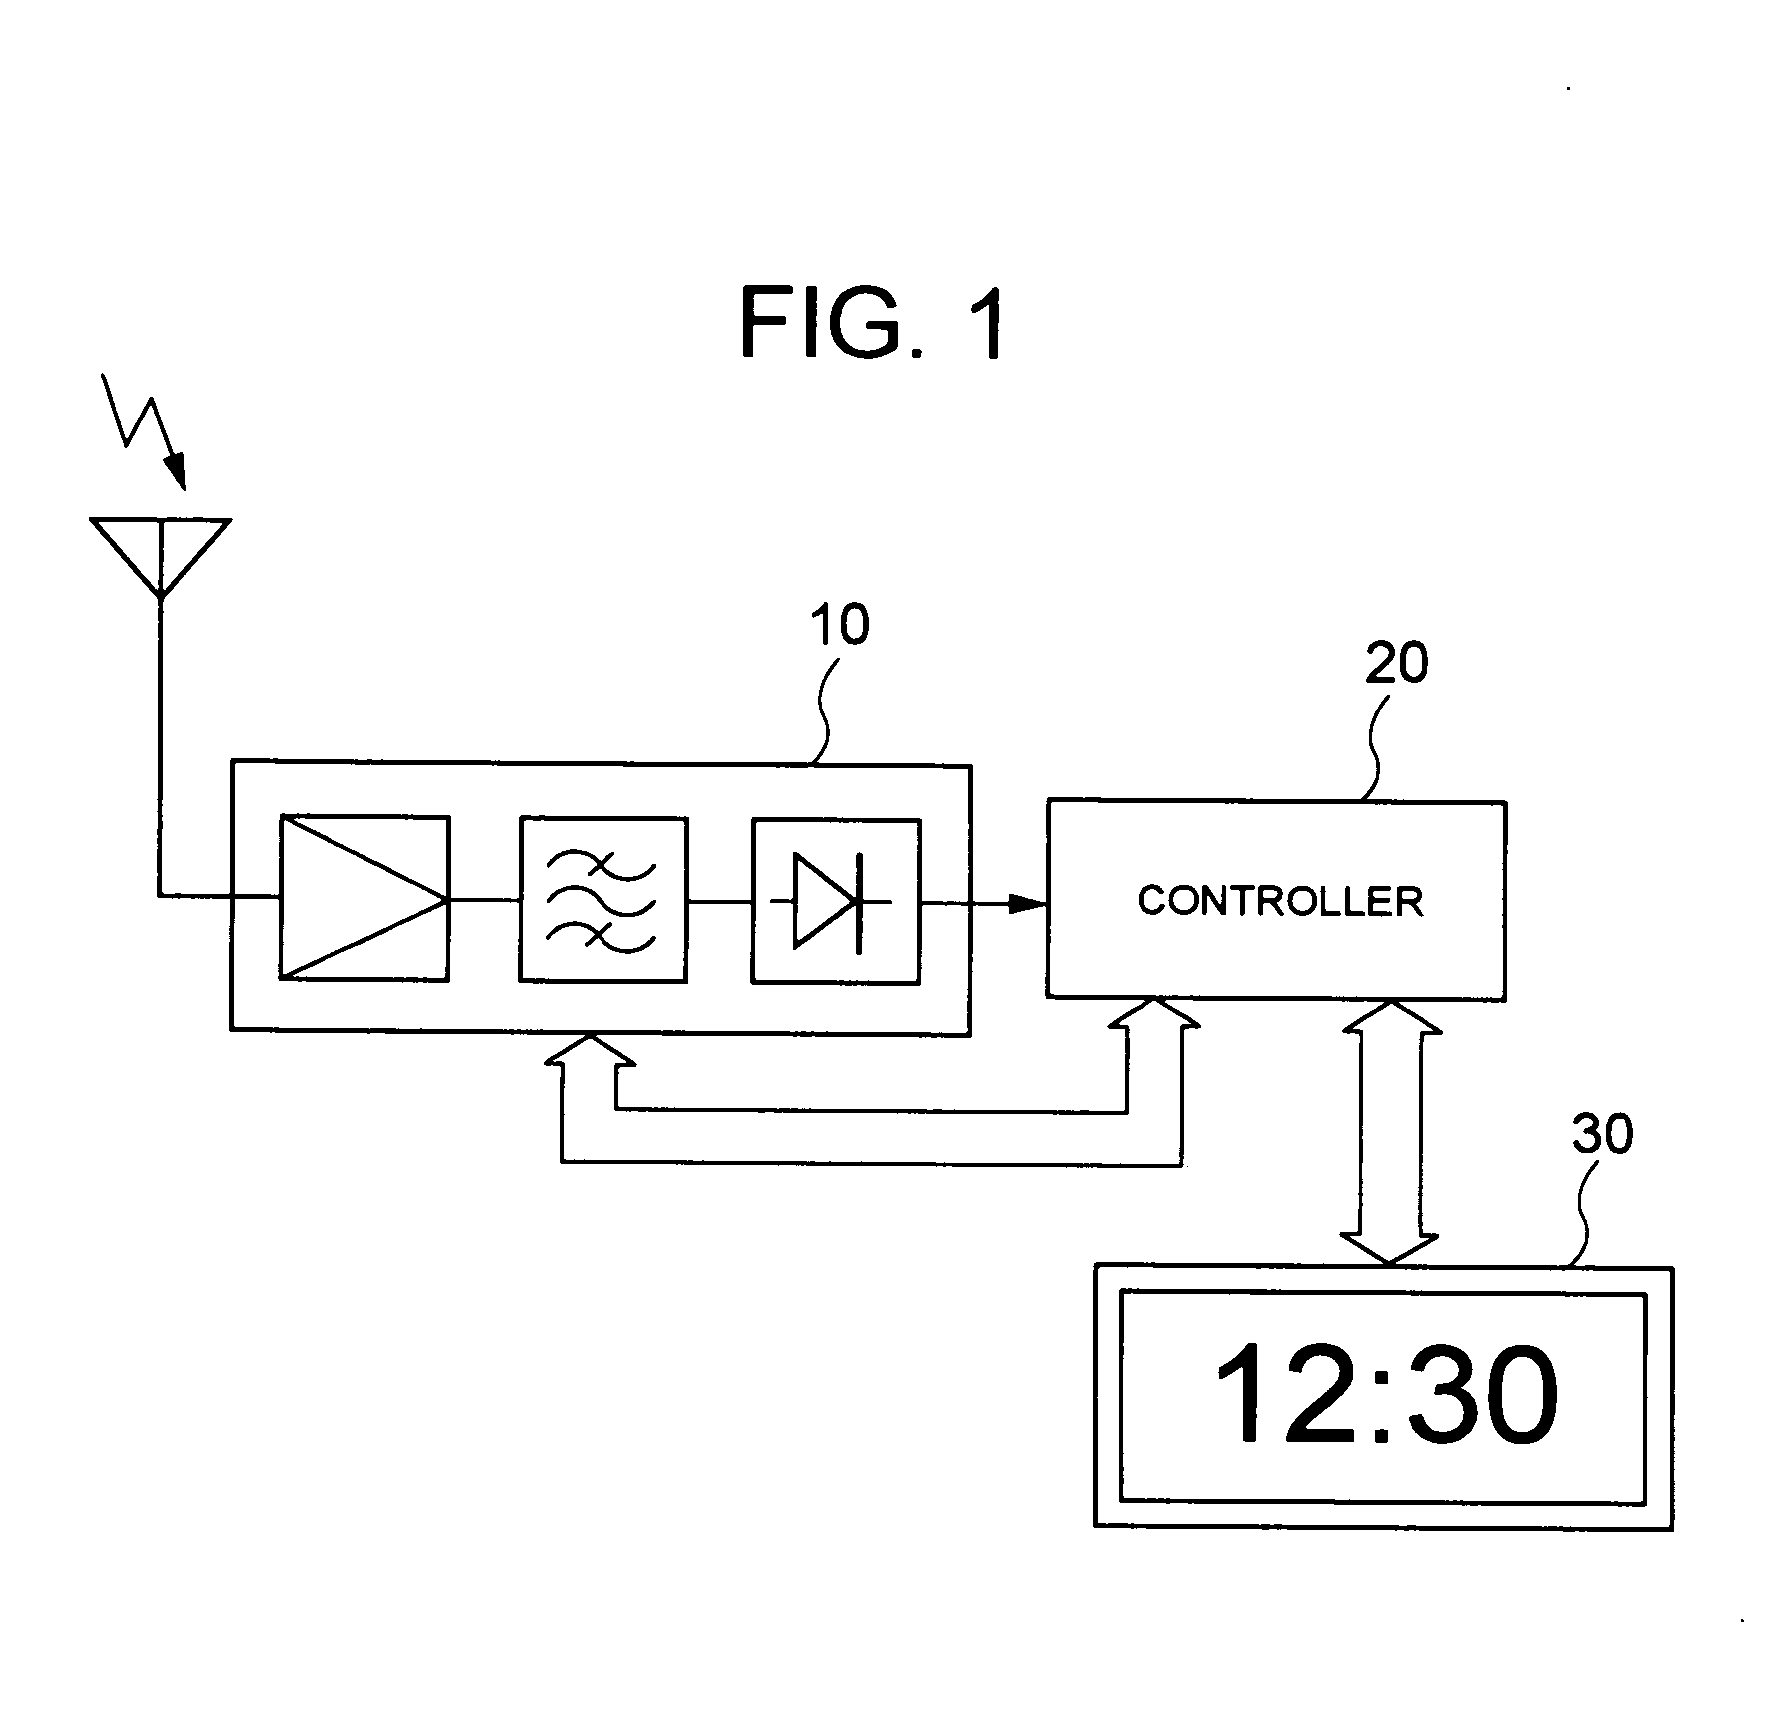 Time-of-day apparatus receiving standard time code broadcast